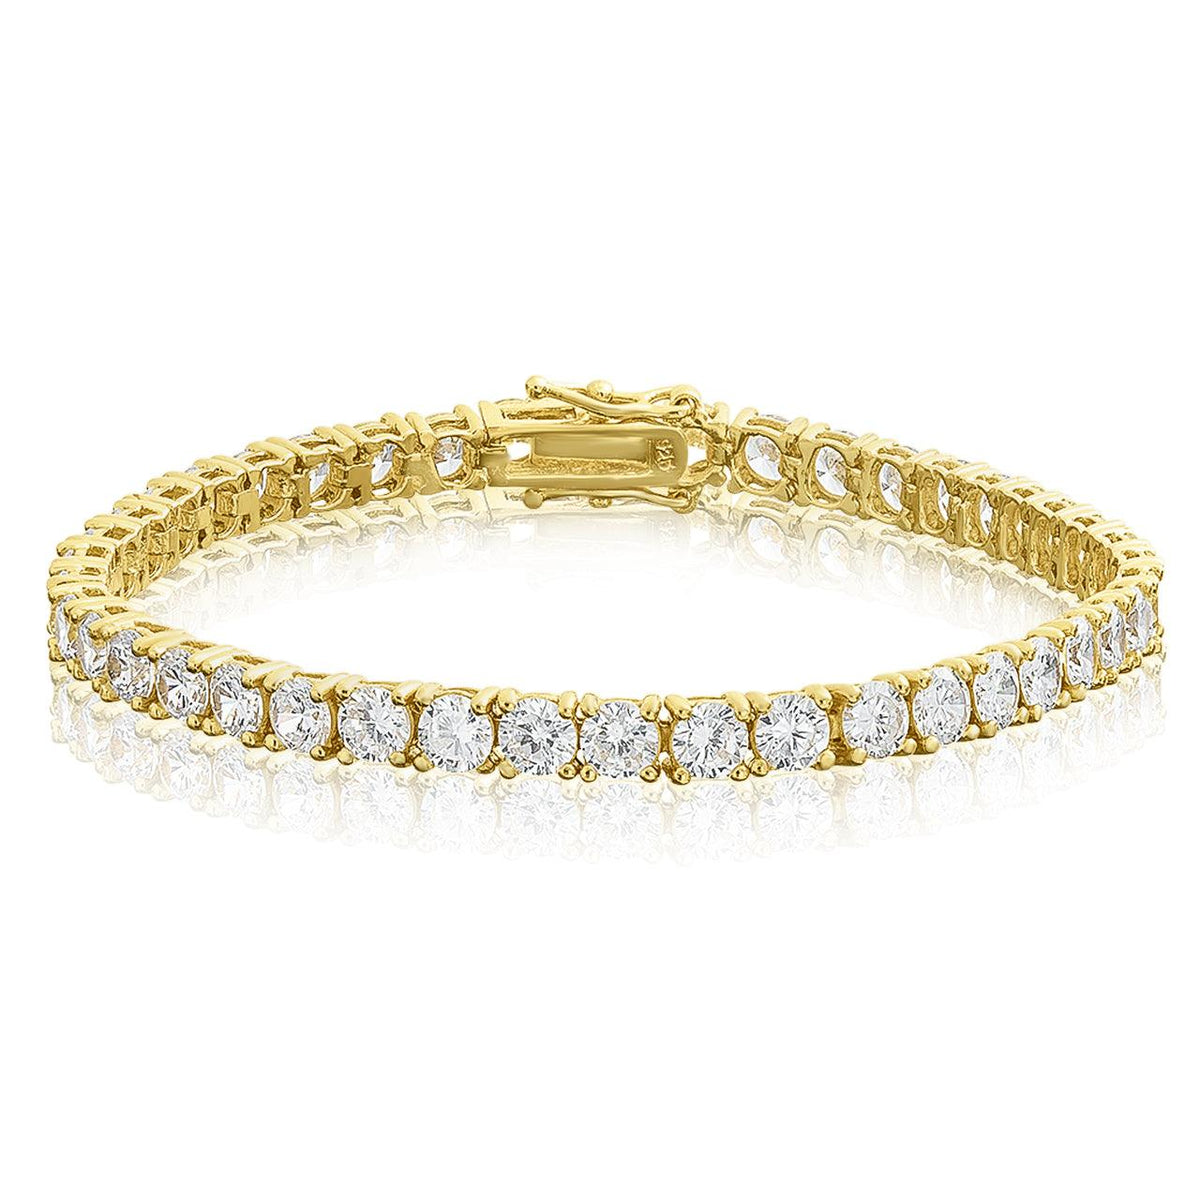 4mm Moissanite Tennis Bracelet - The Real Jewelry CompanyThe Real Jewelry CompanyBracelets